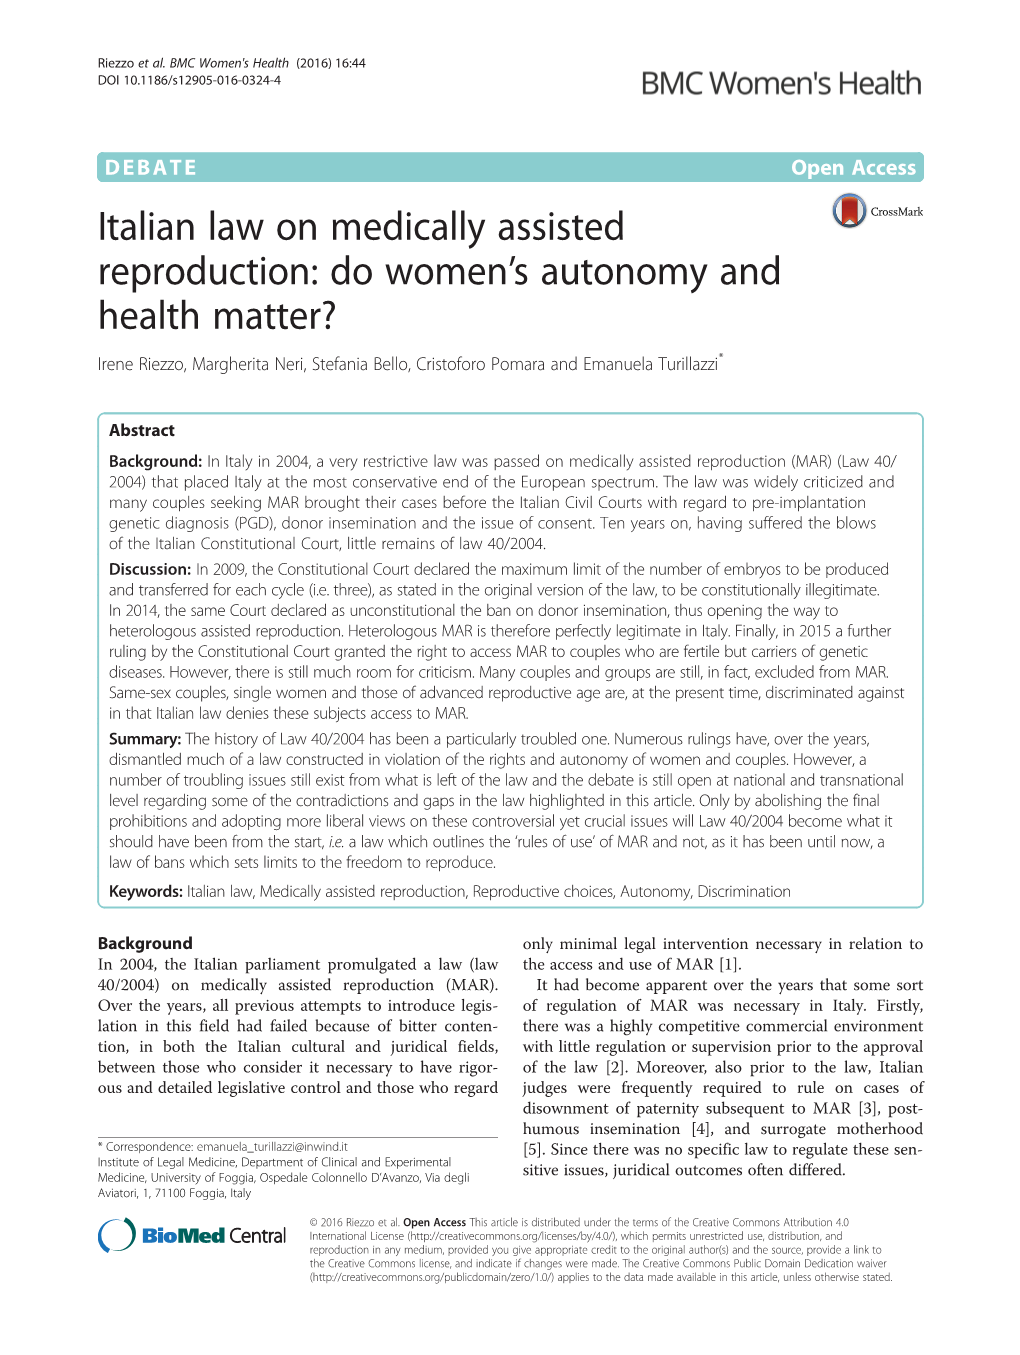 Italian Law on Medically Assisted Reproduction